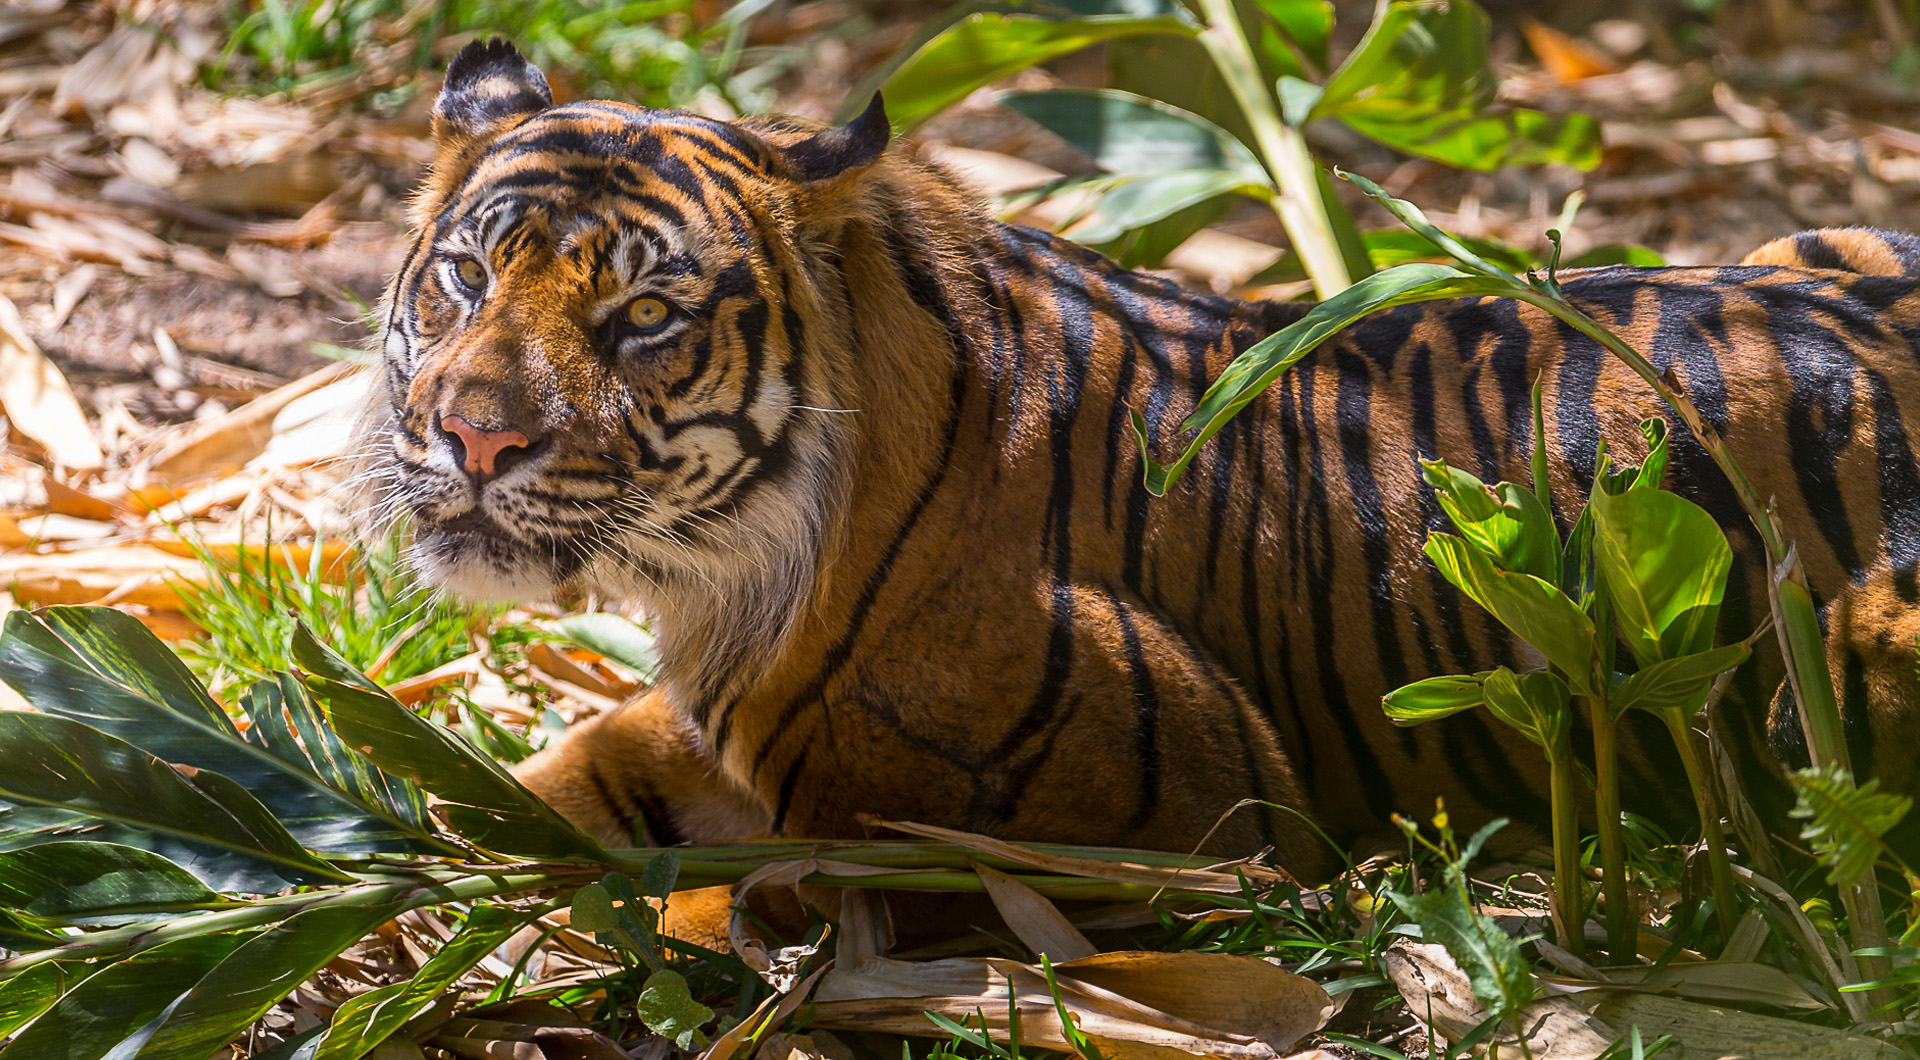 Image of a tiger laying down surrounded by leaves